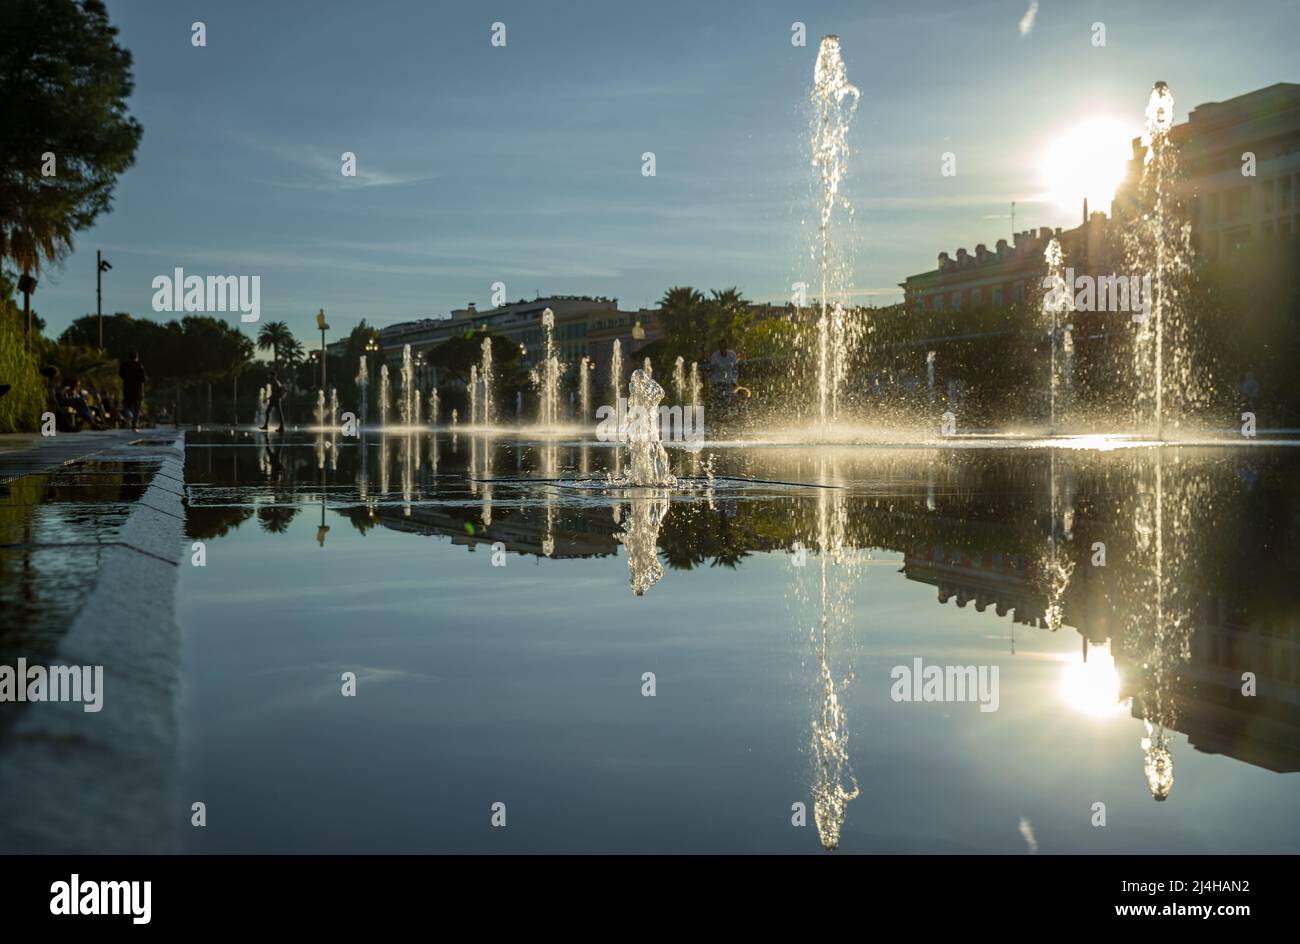 France, Nice, Famous place of Nice, square of fountain, mirror of water, sun reflection Stock Photo